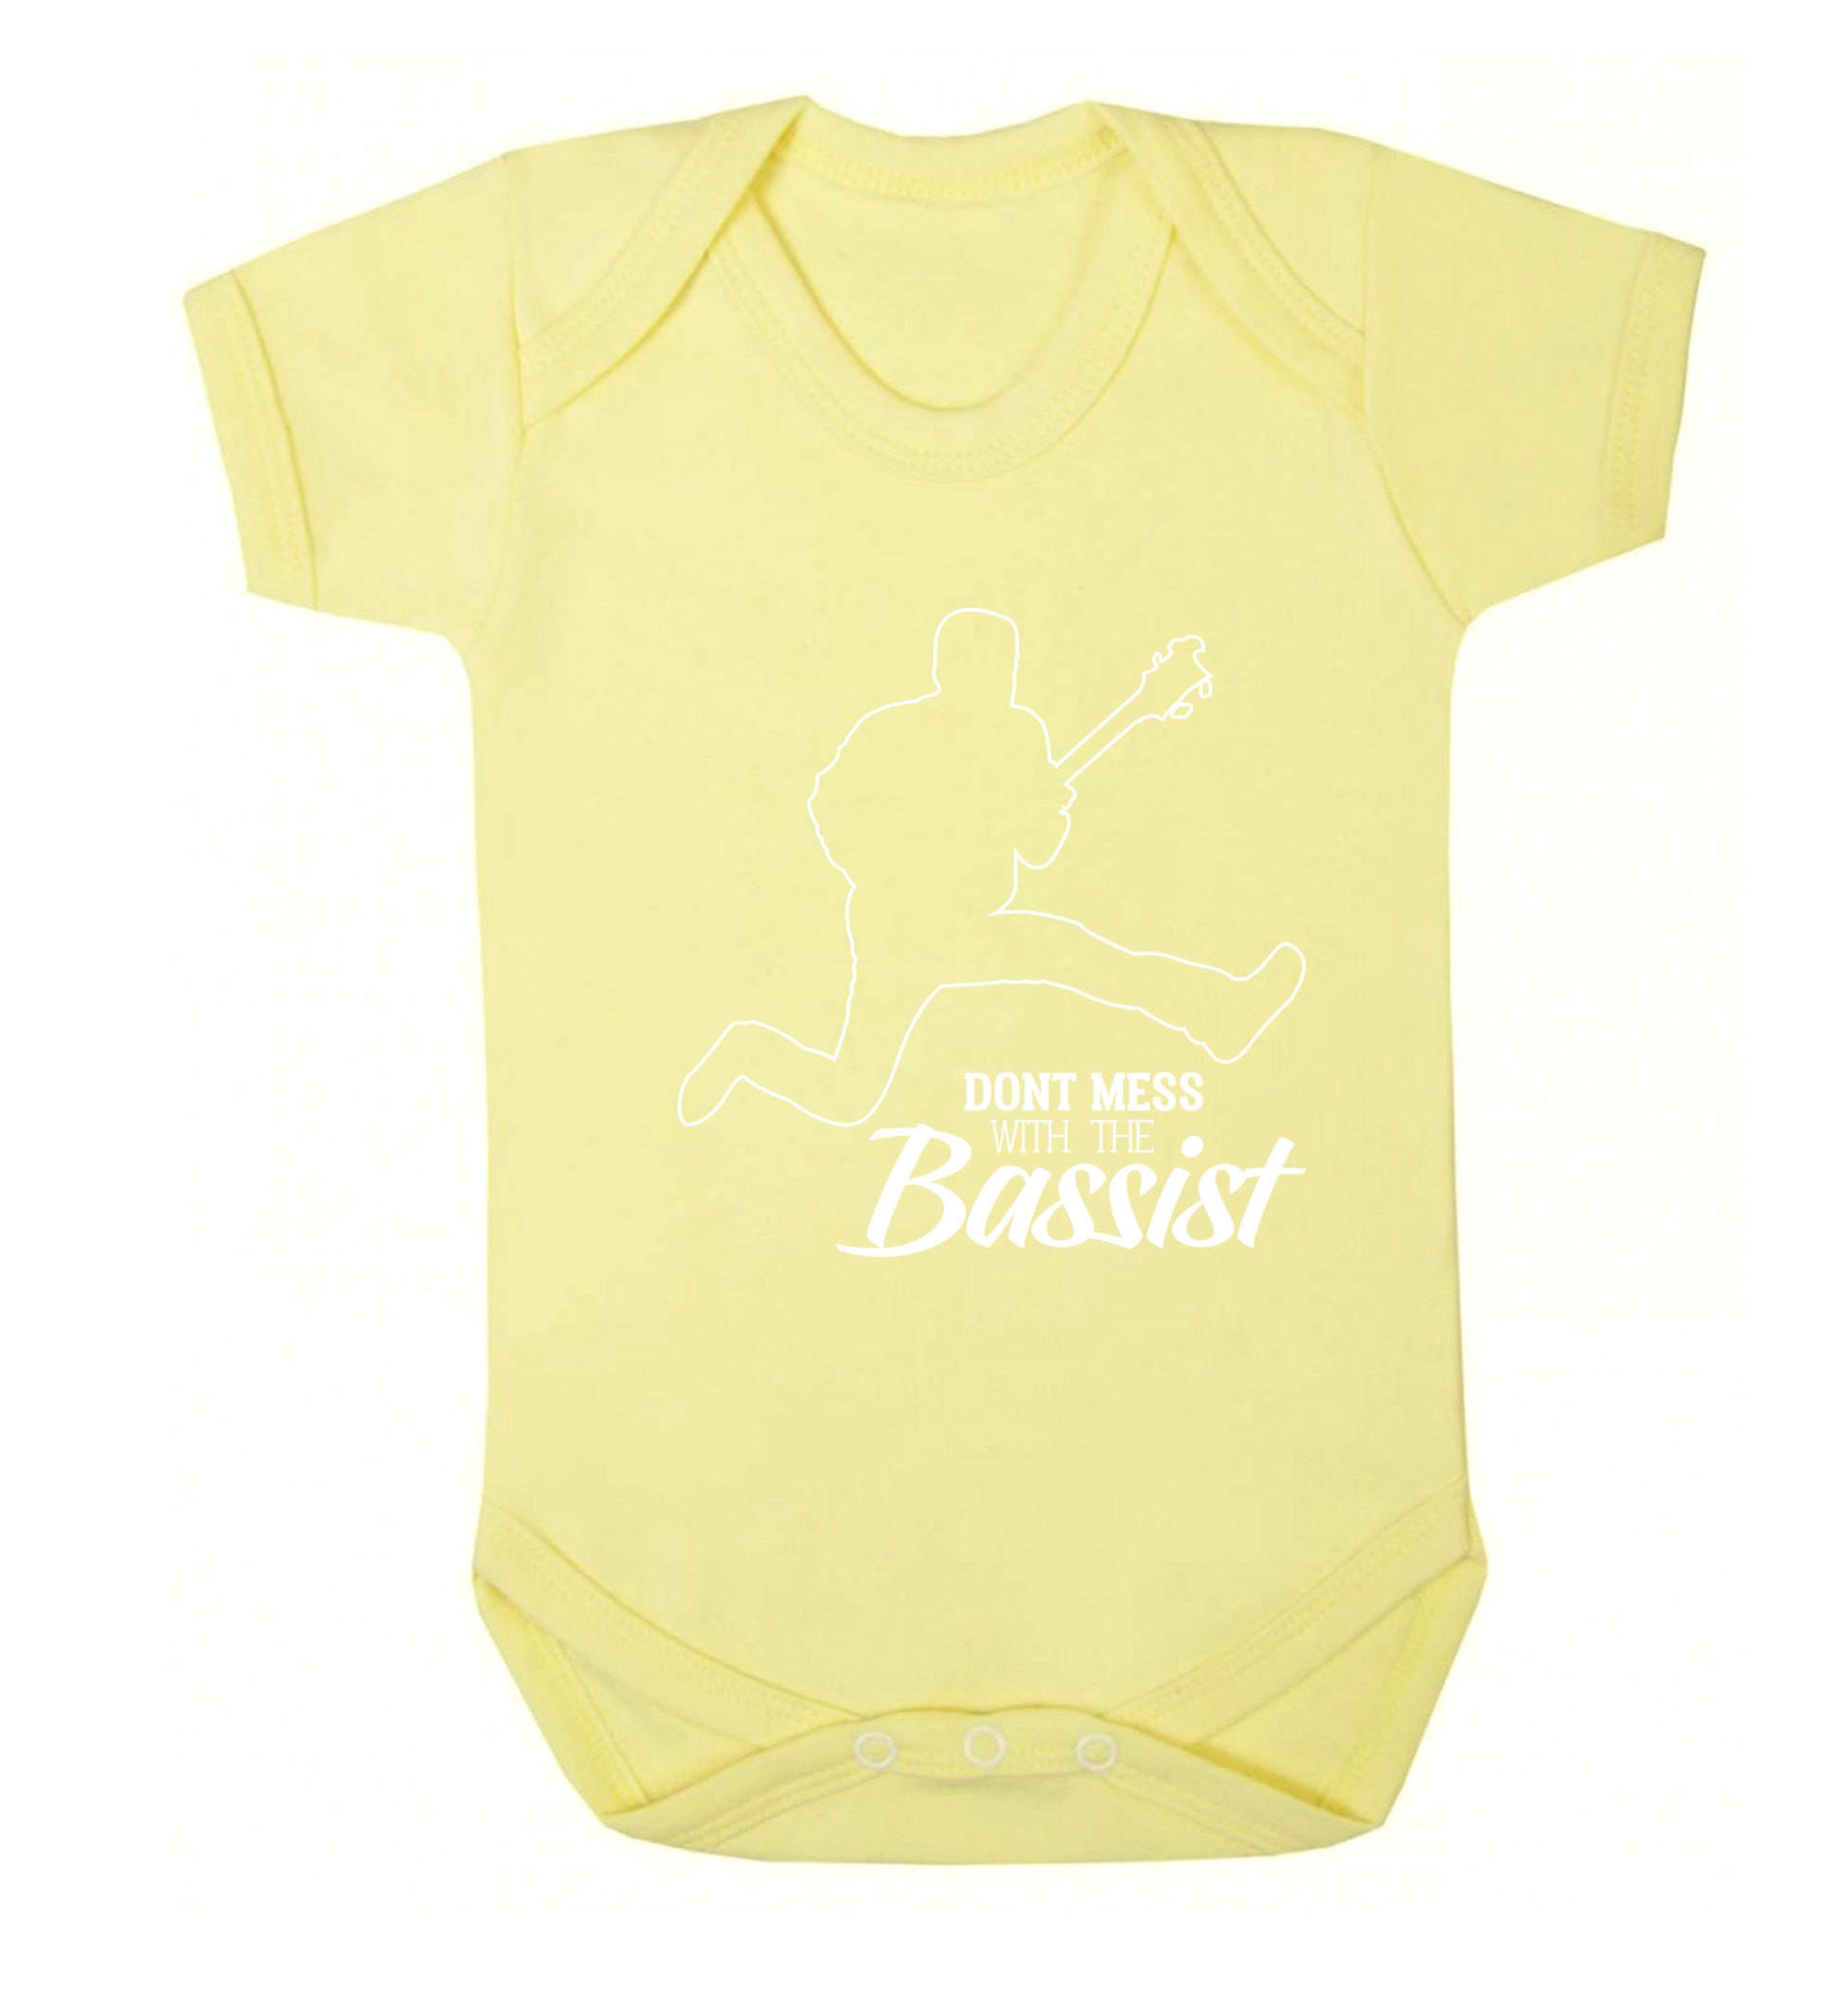 Dont mess with the bassist Baby Vest pale yellow 18-24 months